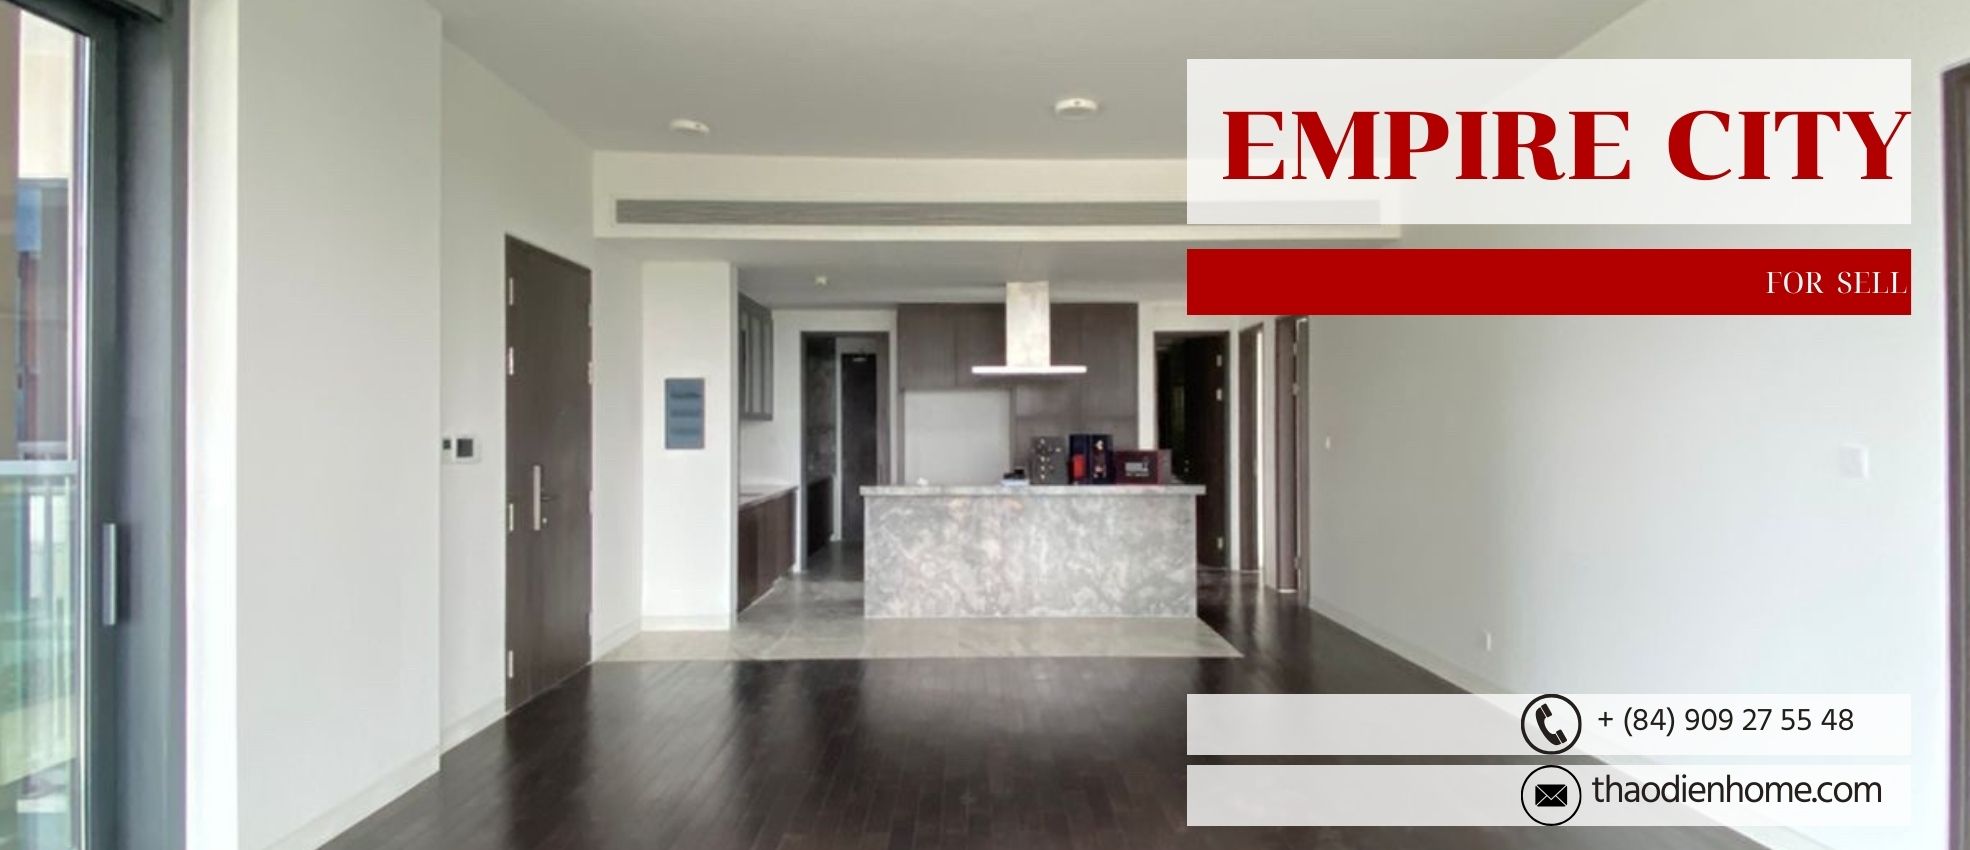 Luxury Unfurnished 3BR Apartment in Empire City with Panoramic River Views